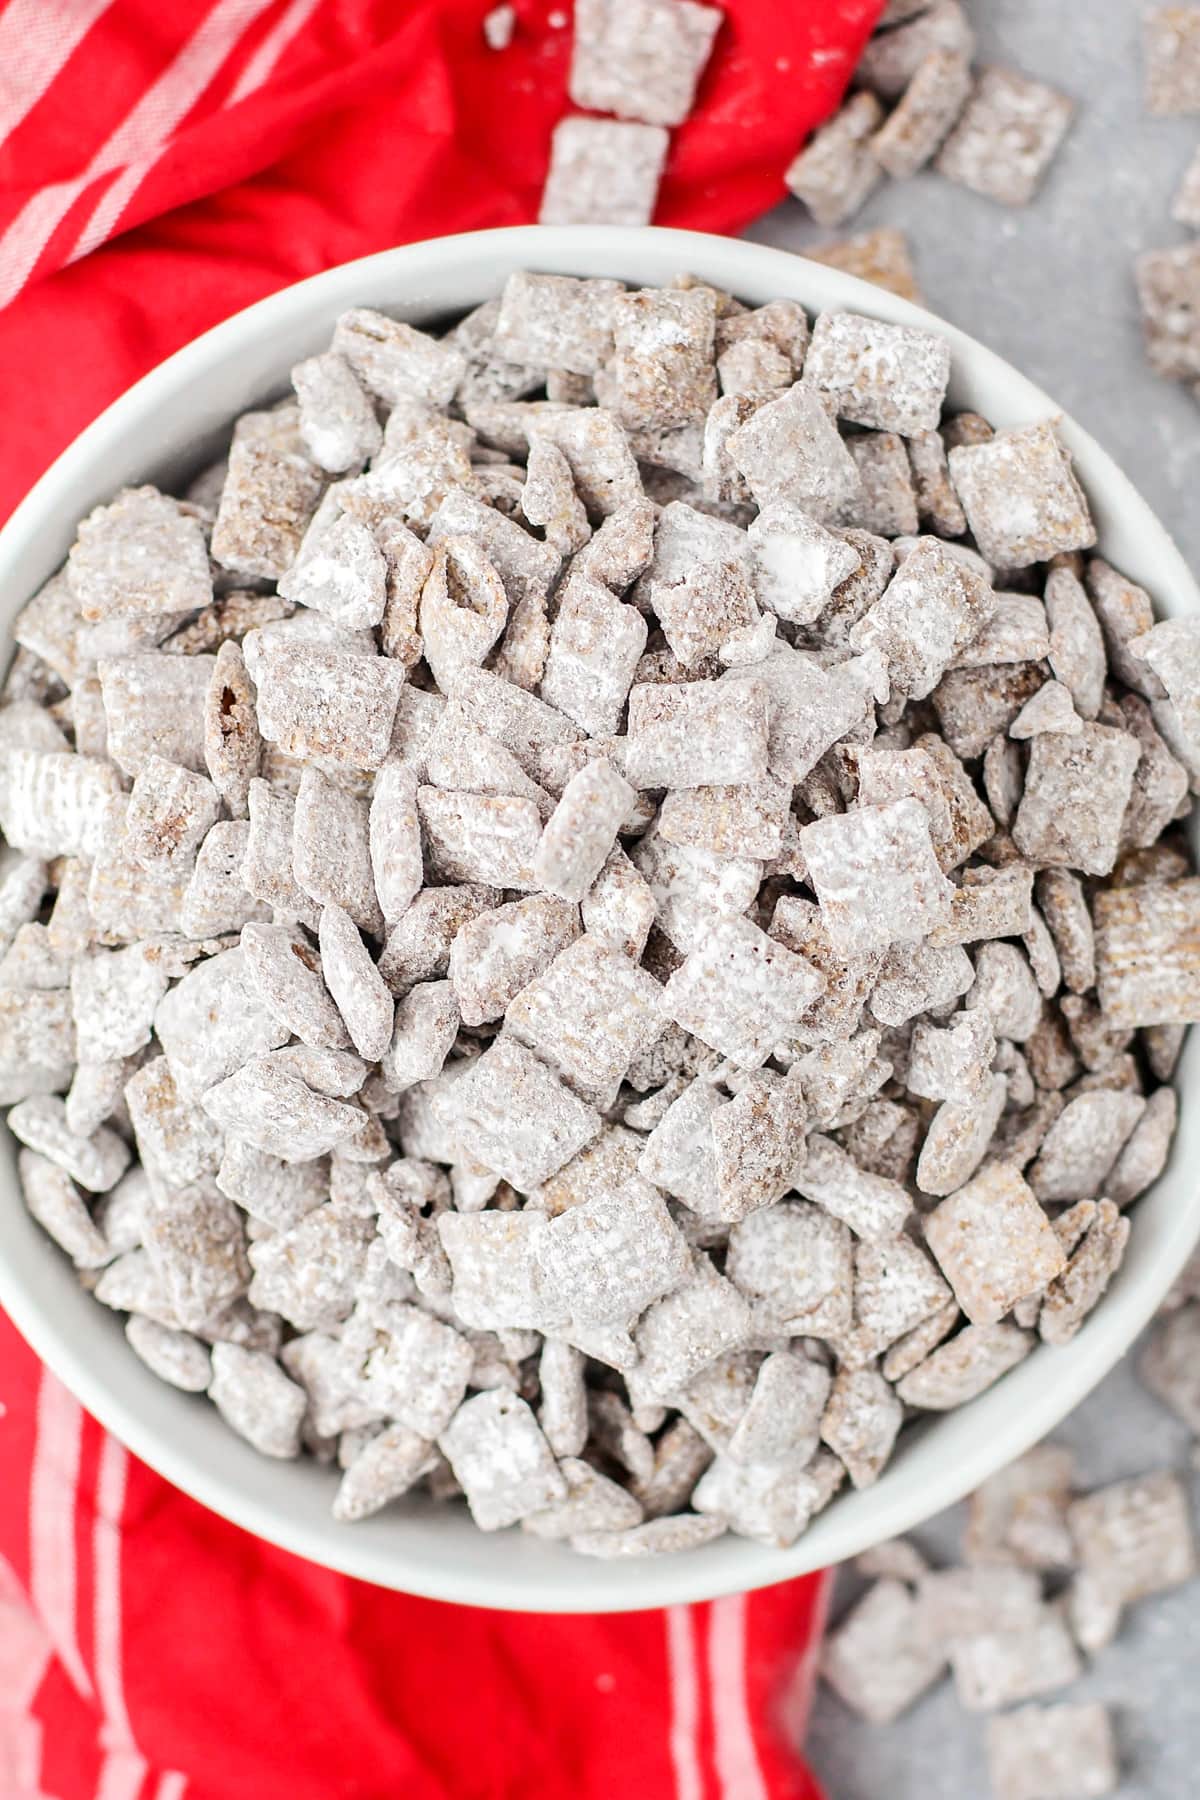 Homemade Puppy Chow recipe in a bowl close up image.